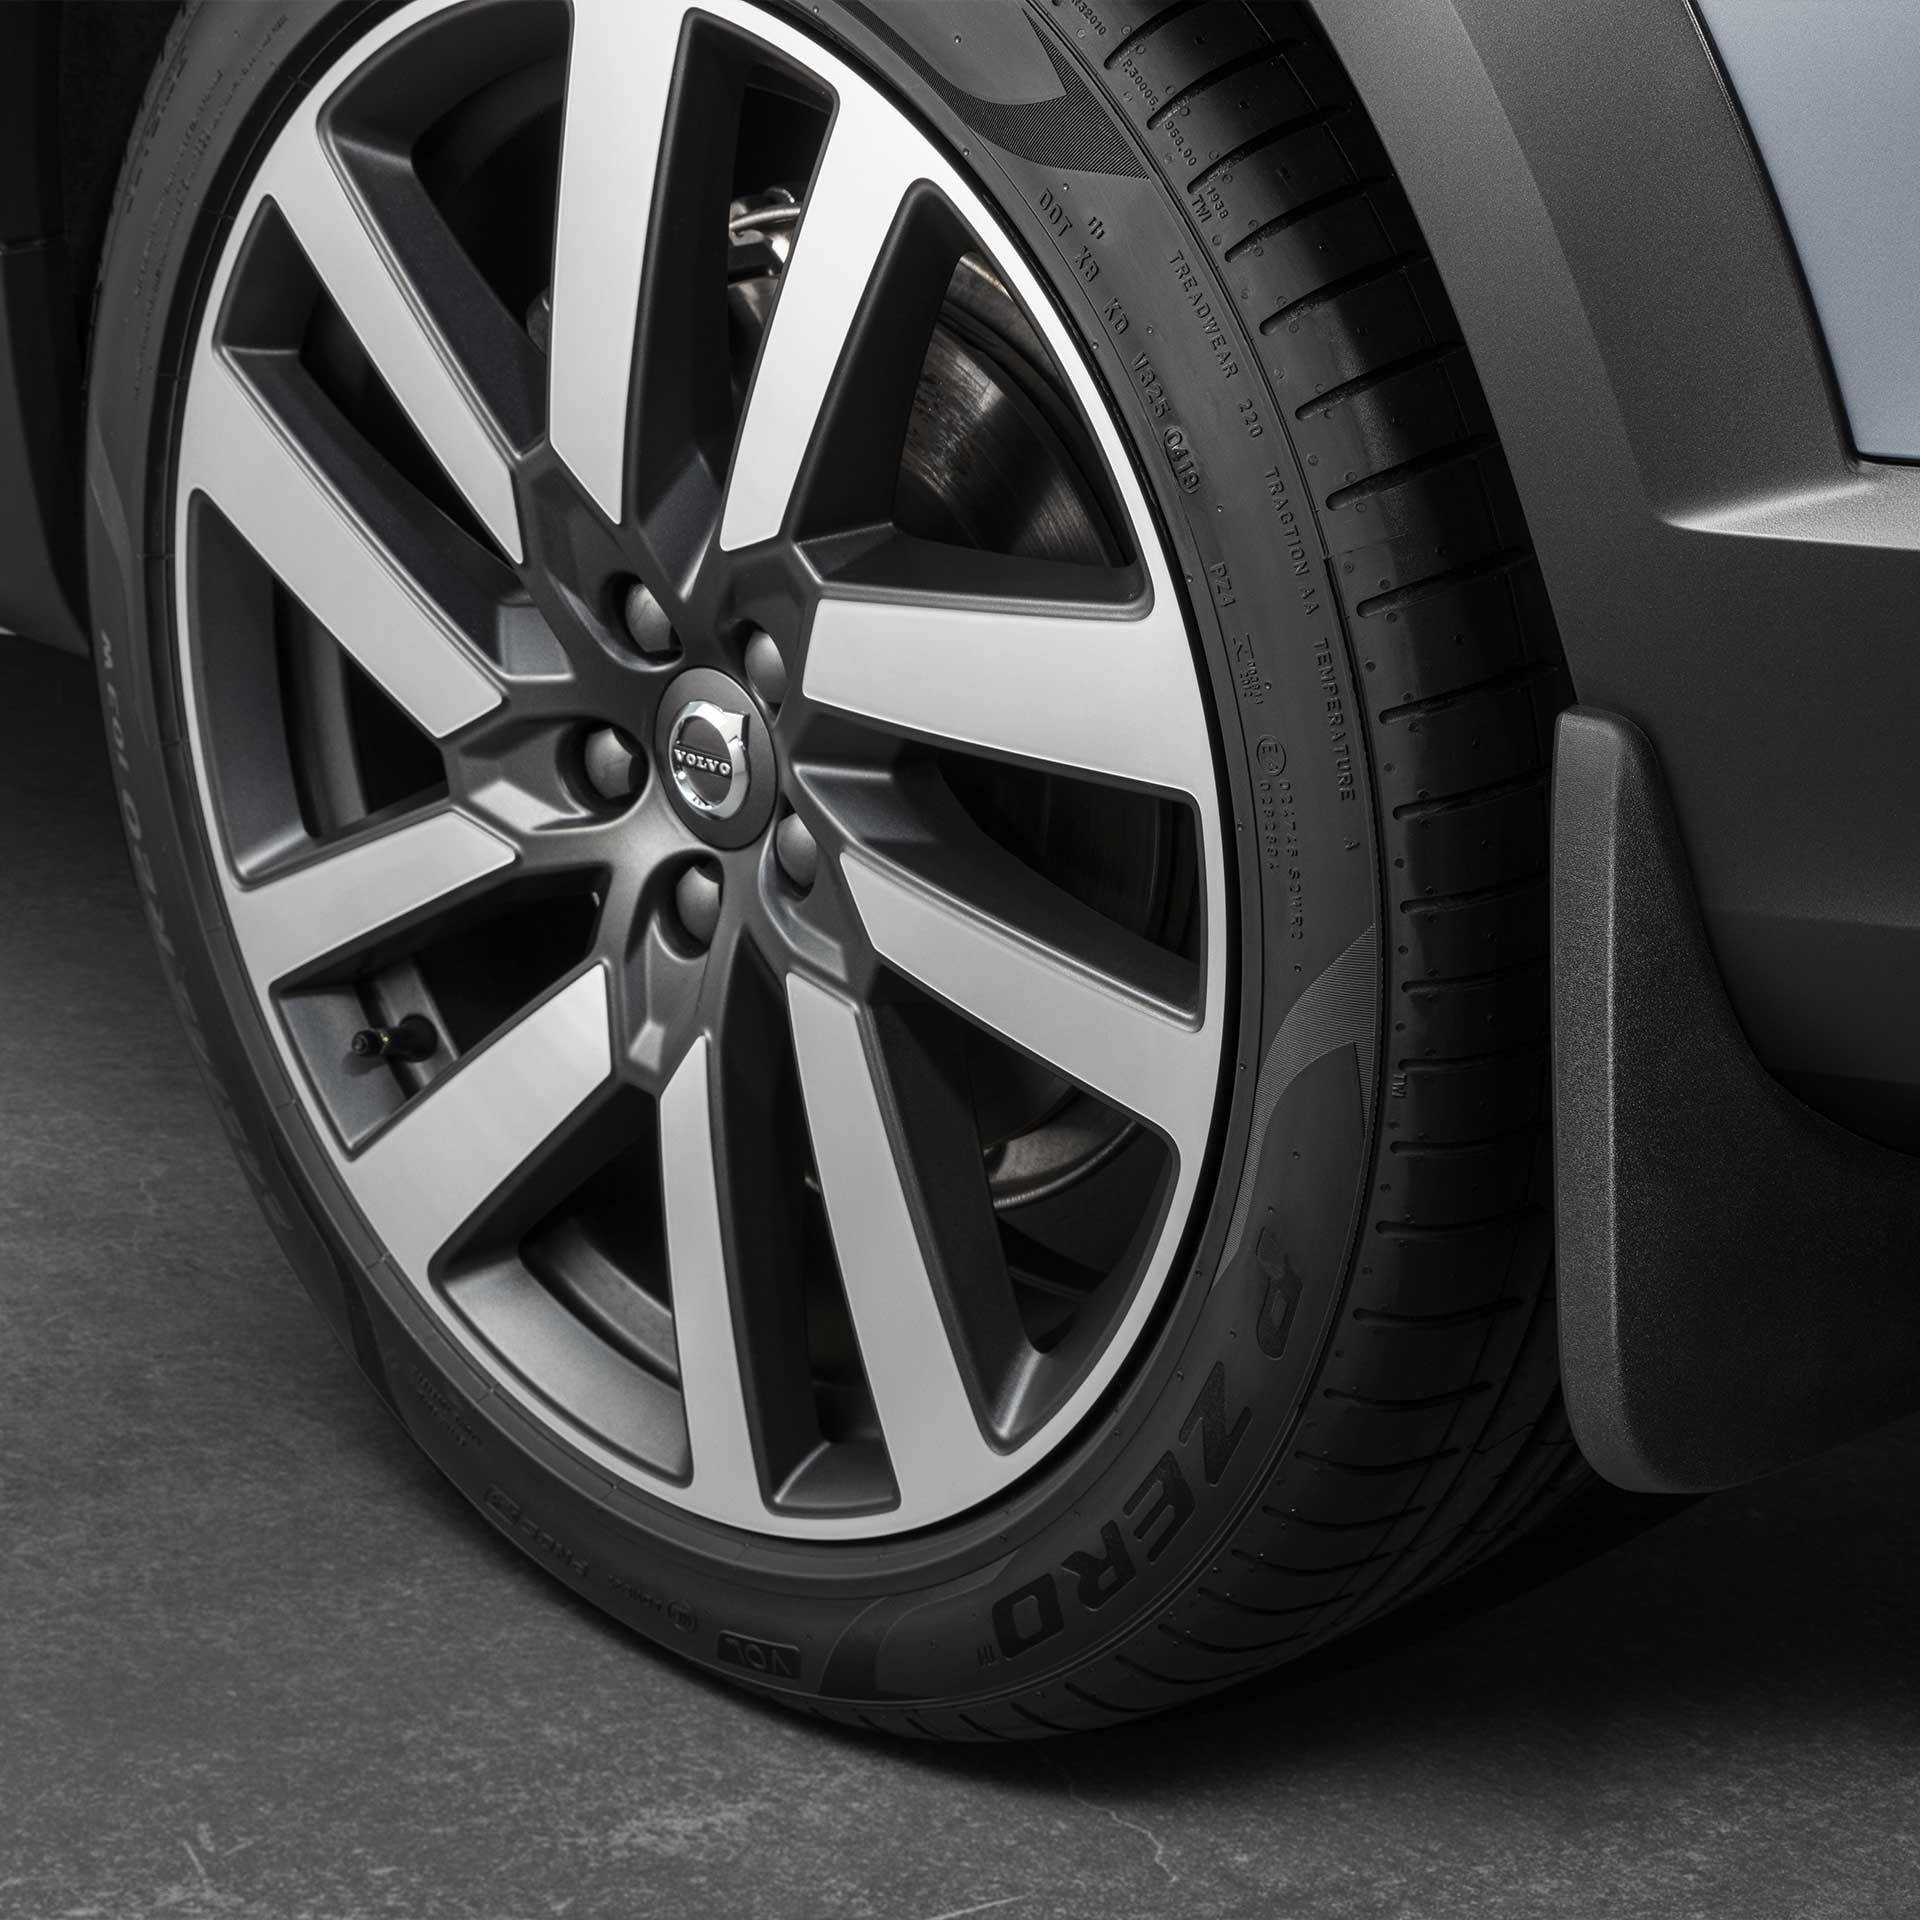 Extra stability and grip with large wheels on the Volvo V90 Cross Country.